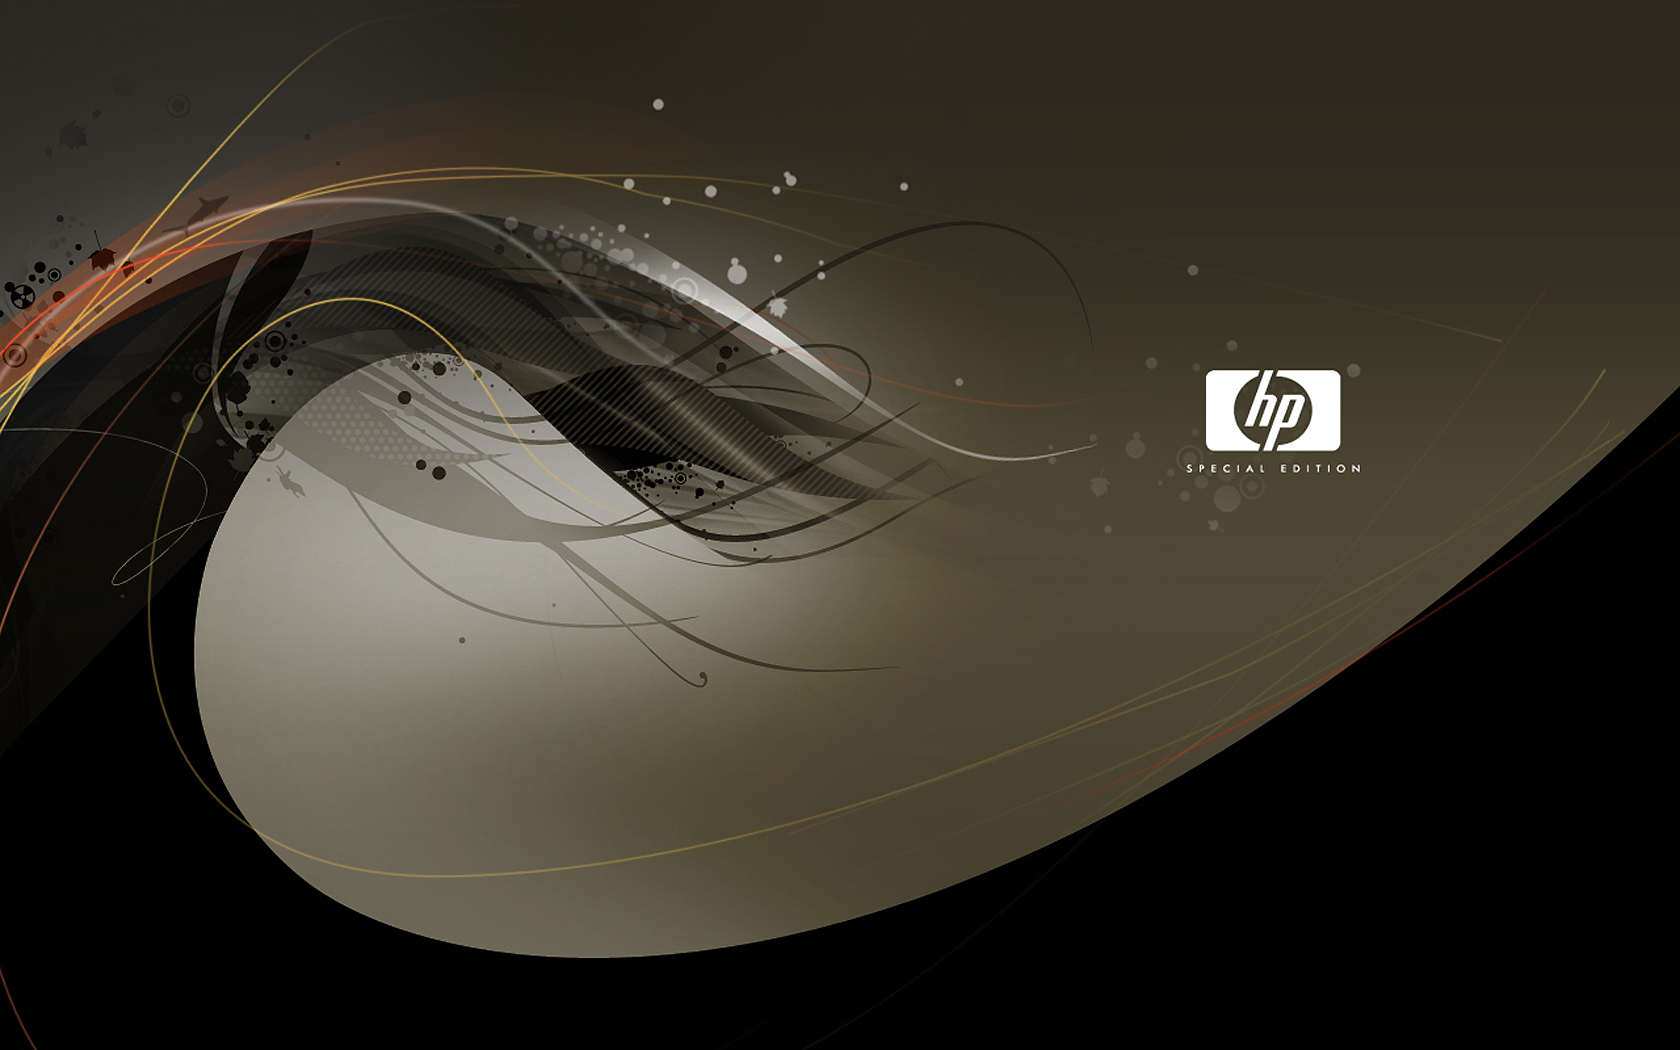 Download the HP Abstract Wallpaper, HP Abstract iPhone Wallpaper